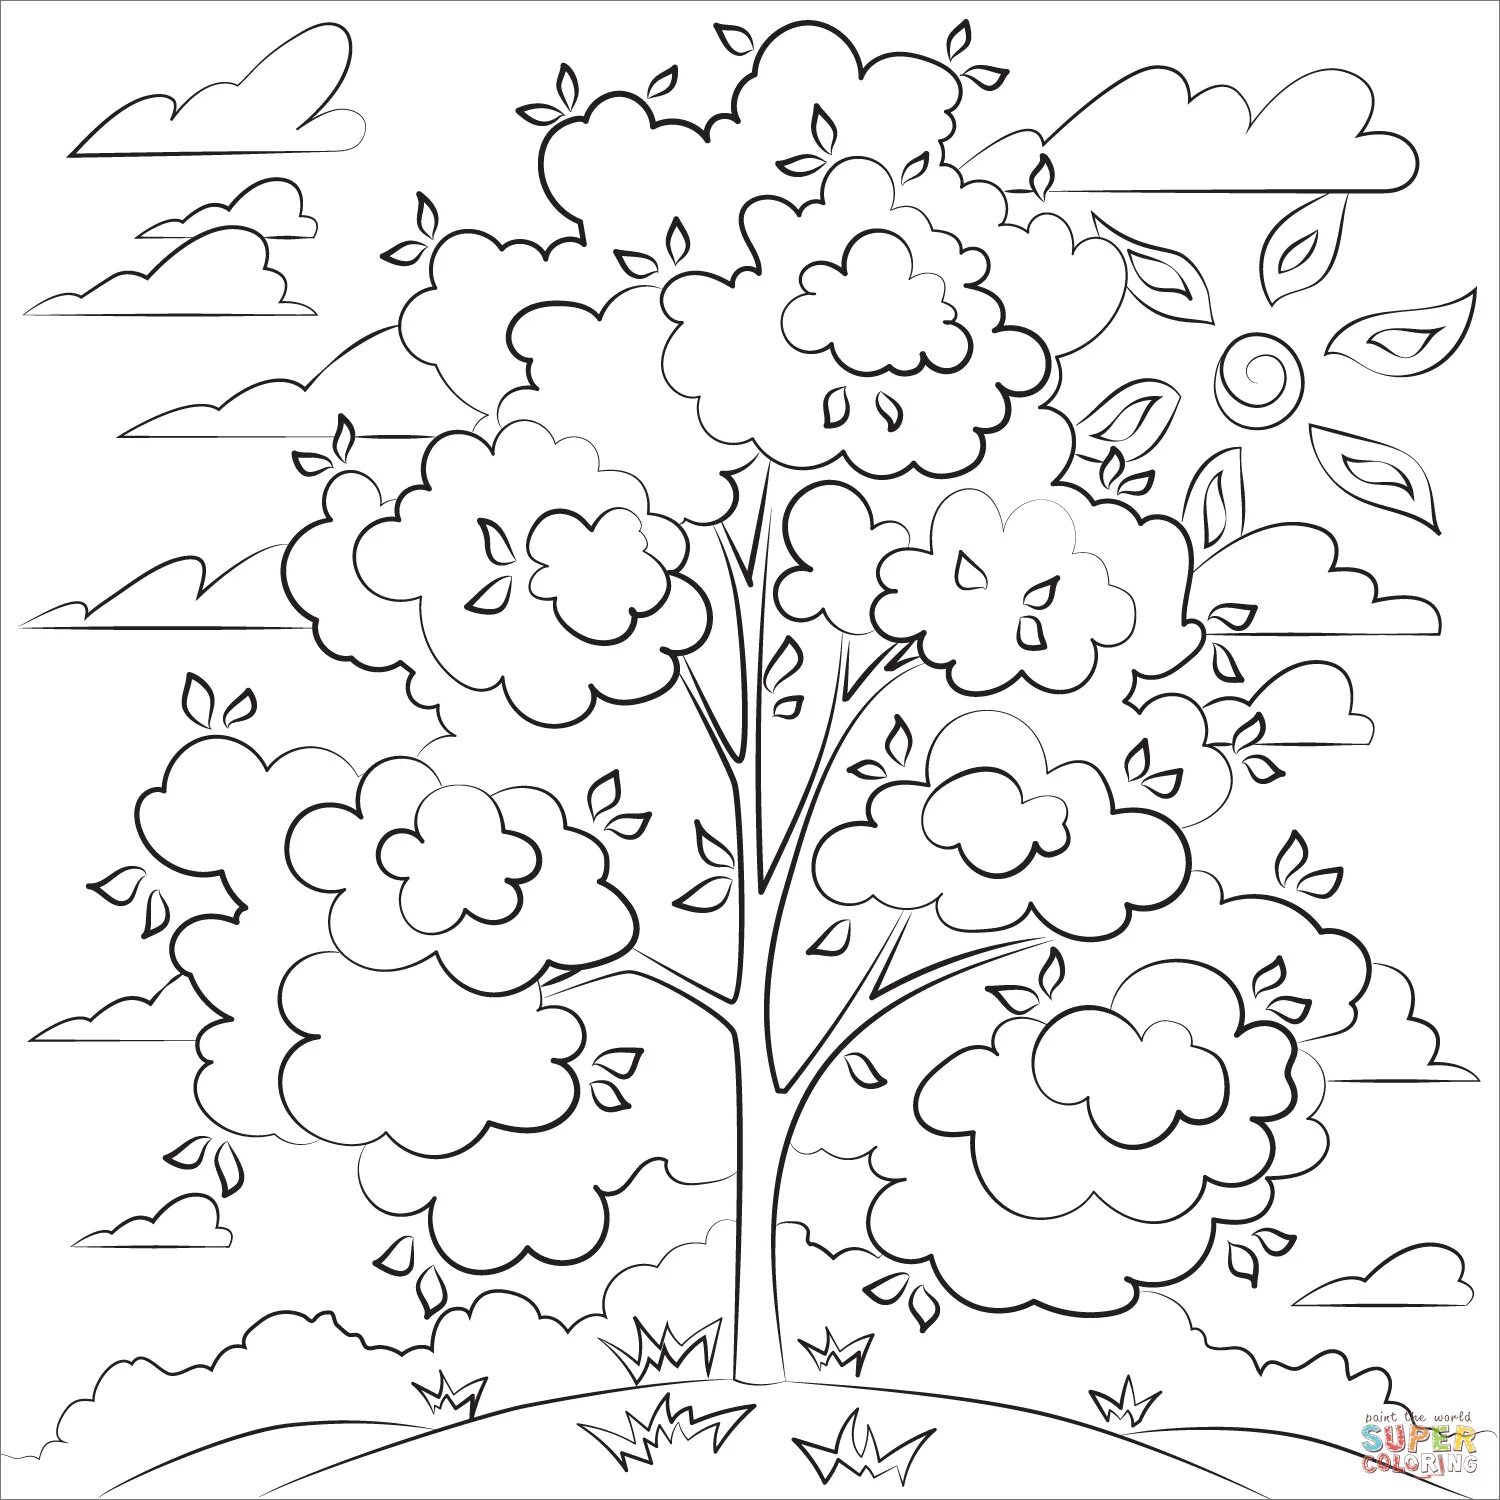 Live tree coloring for children 5-6 years old